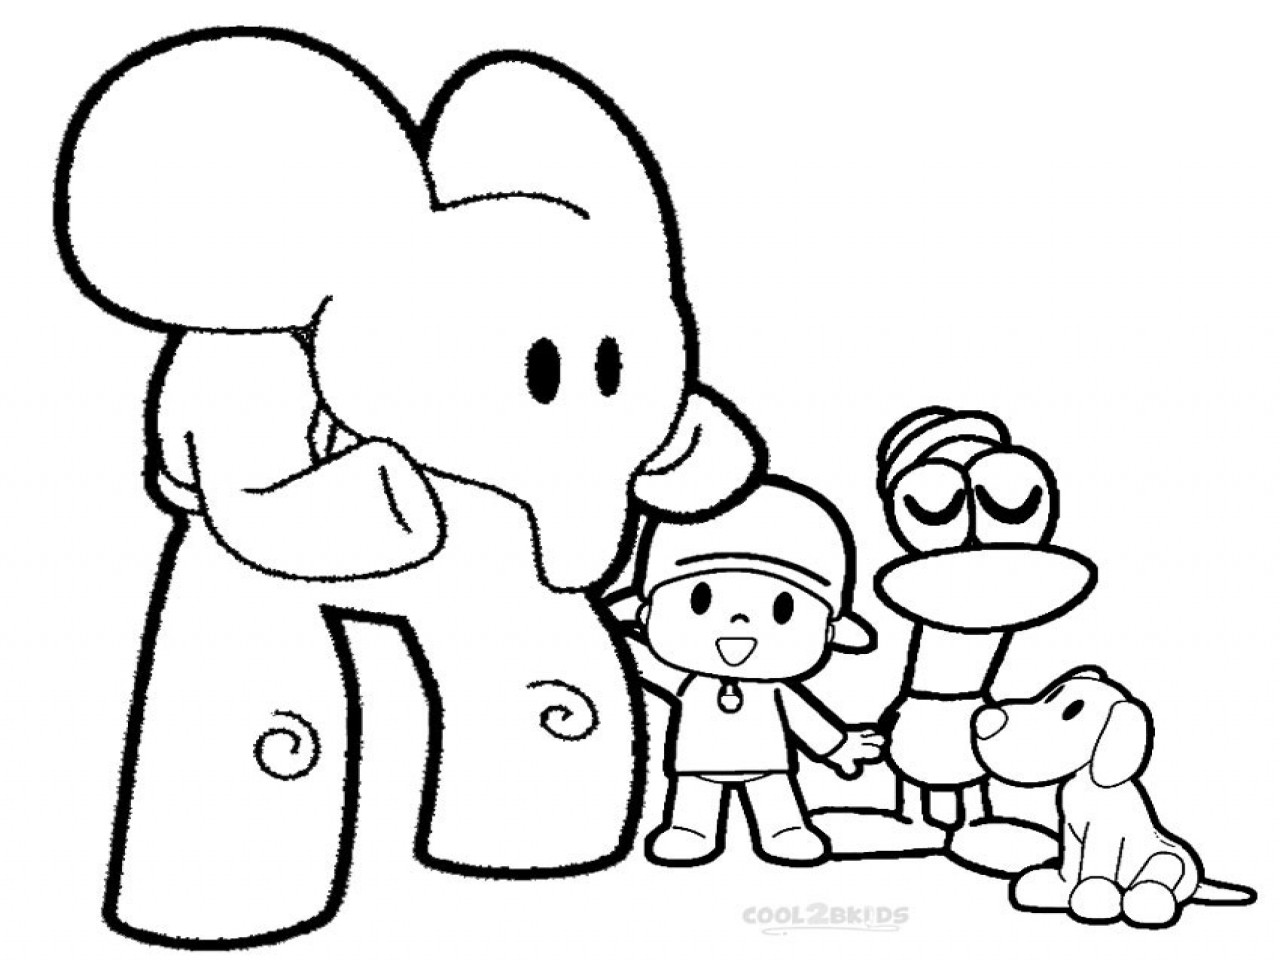 pocoyo character coloring pages